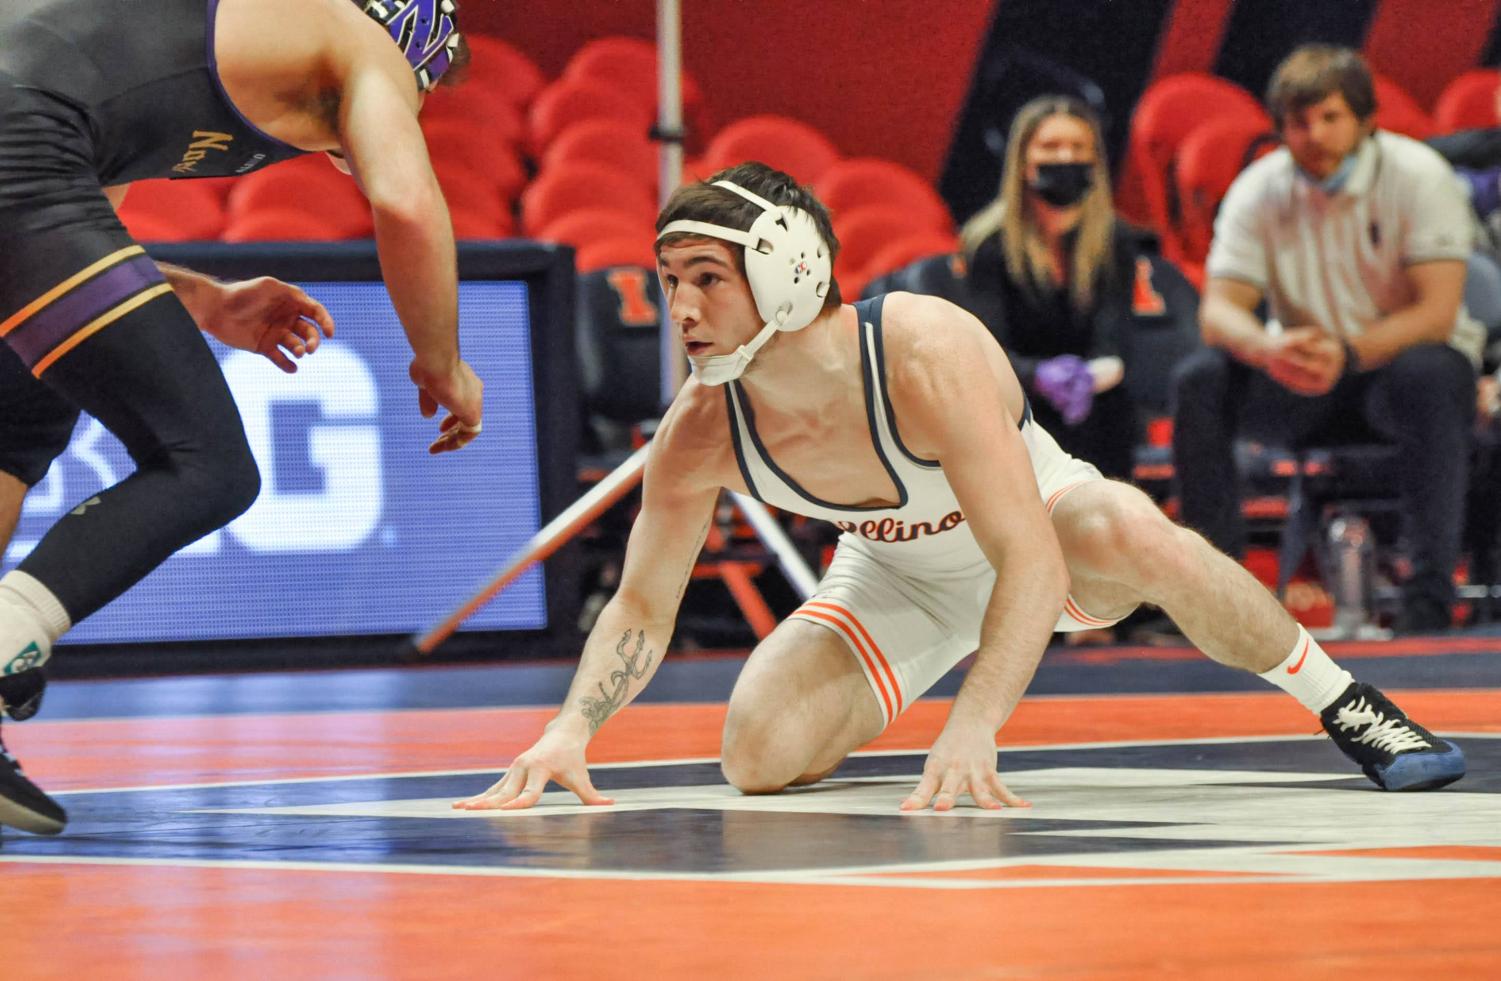 Illini wrestling aims to get back in win column against conference rivals